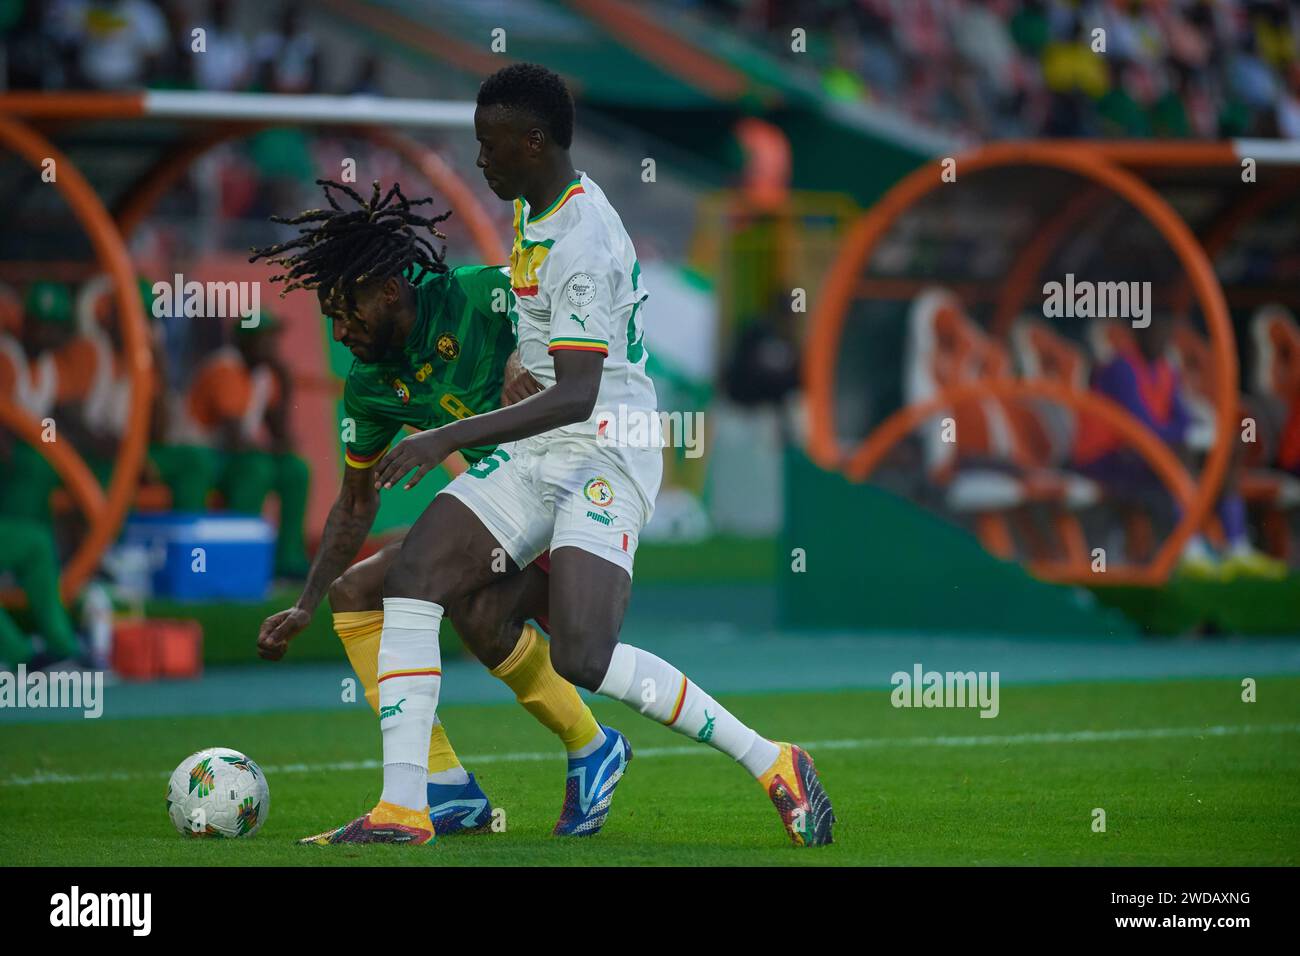 Highlights of the match between Senegal and Cameroon at the Africa Cup of Nations 2023,  the duel between Zambo Anguissa and Pape Gueye Stock Photo